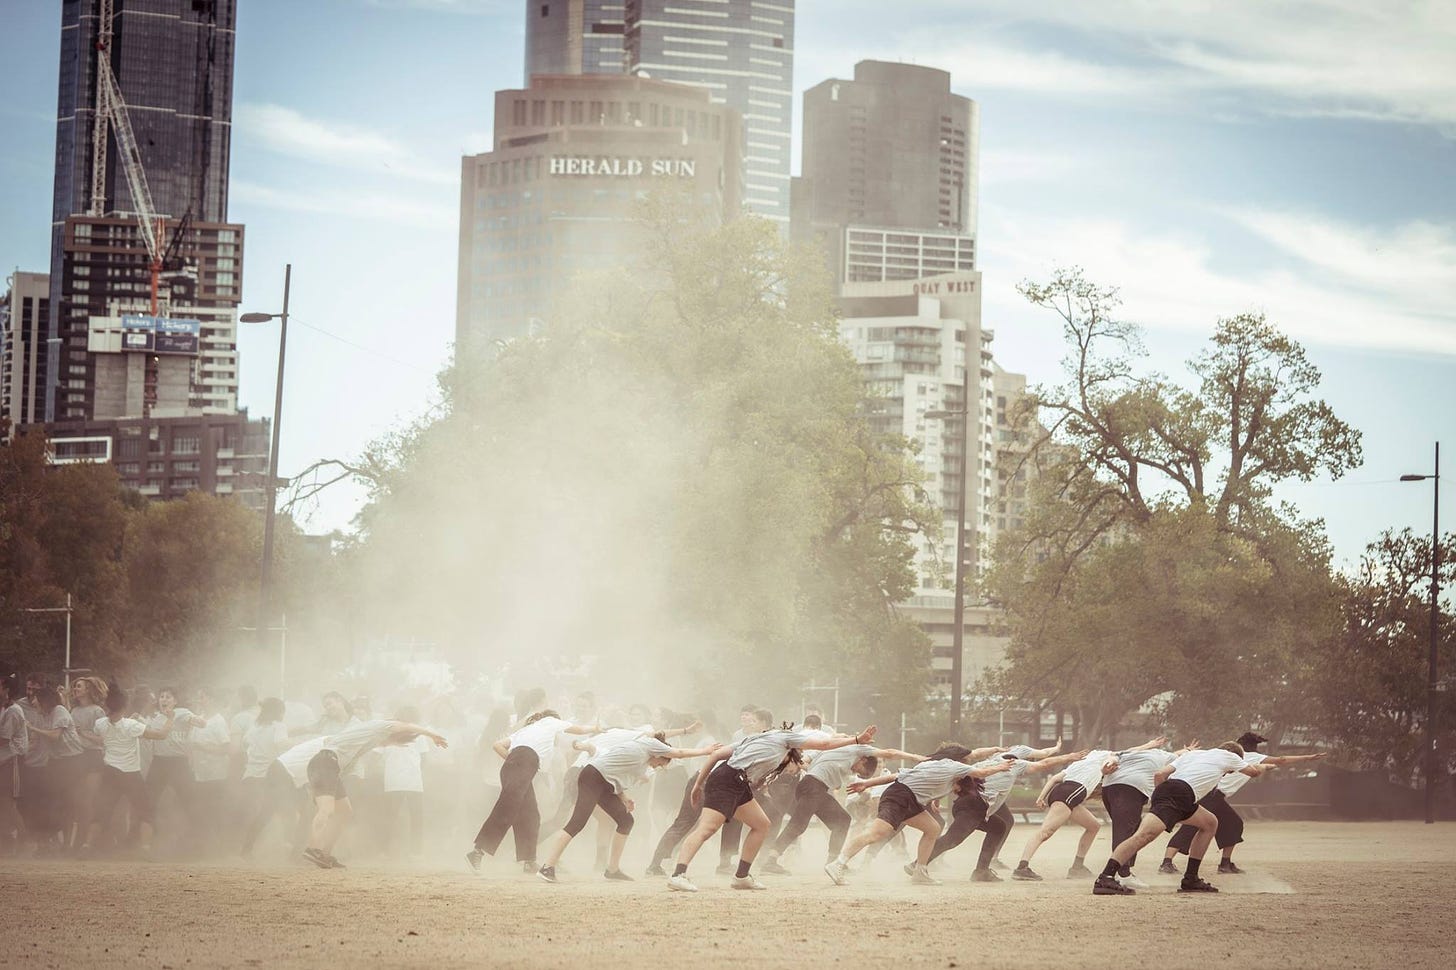 One group of dancers leans to their left, the other group rvaes, face-to-face. Dust rises against a backdrop of Melbourne's city buildings